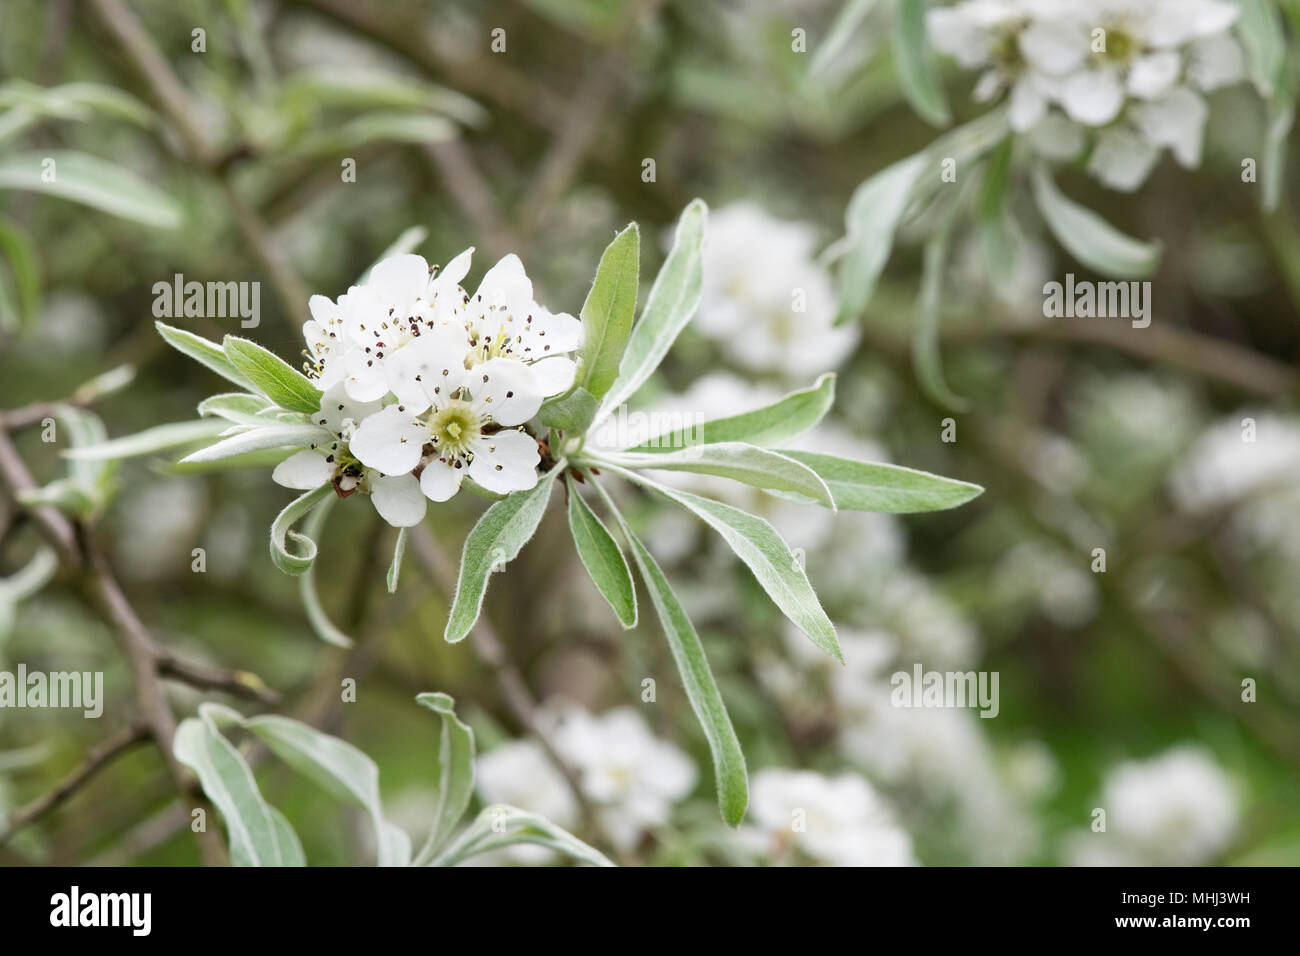 Pyrus salicifolia 'Pendula' . Pendulous willow leaved pear tree in blossom in spring Stock Photo